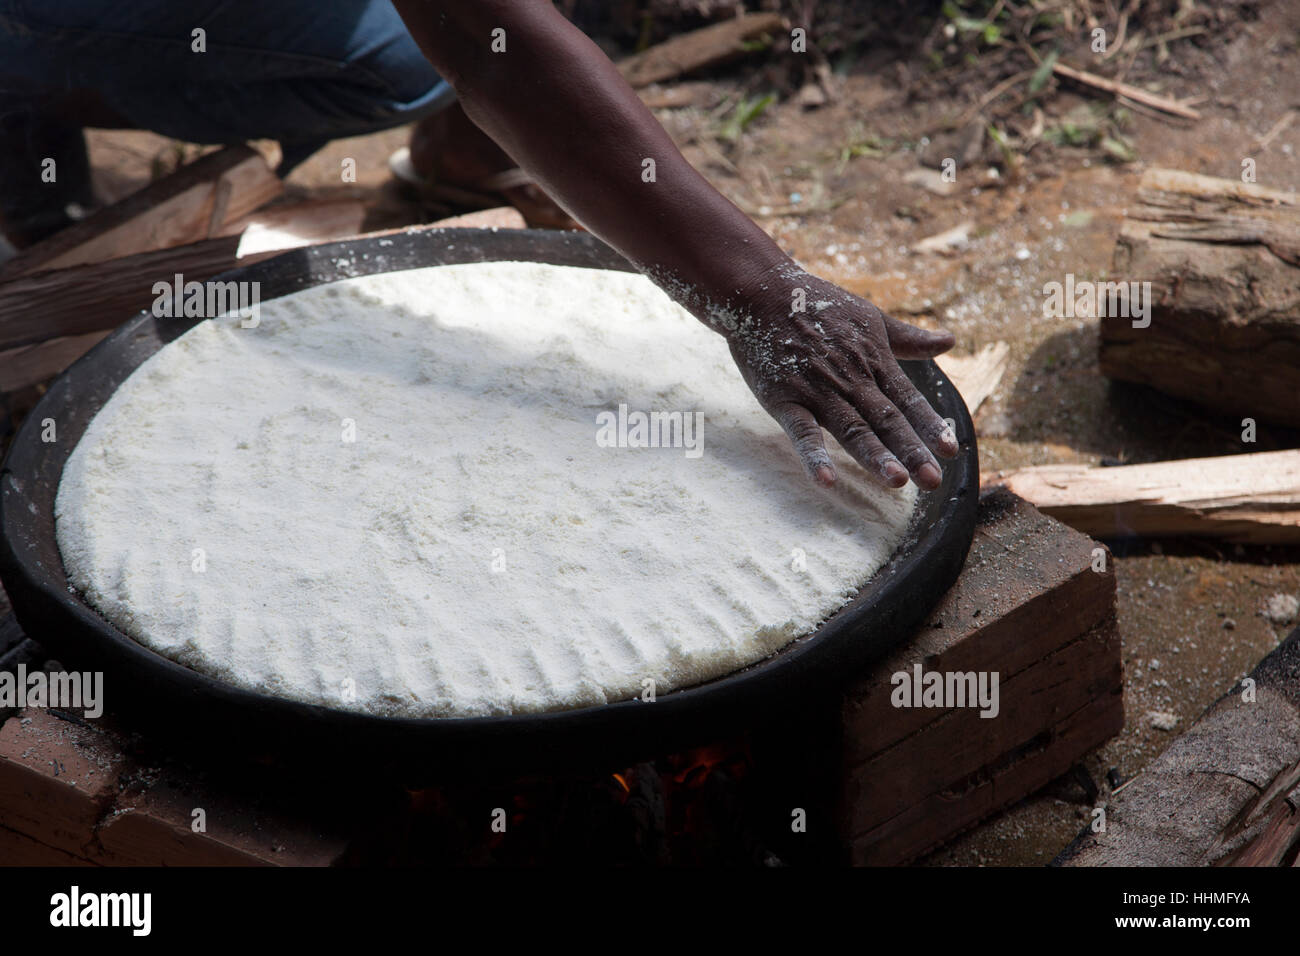 A type of typical flatbread made from cassava in the Amazonian village of Pucaurquillo, Peru. Stock Photo